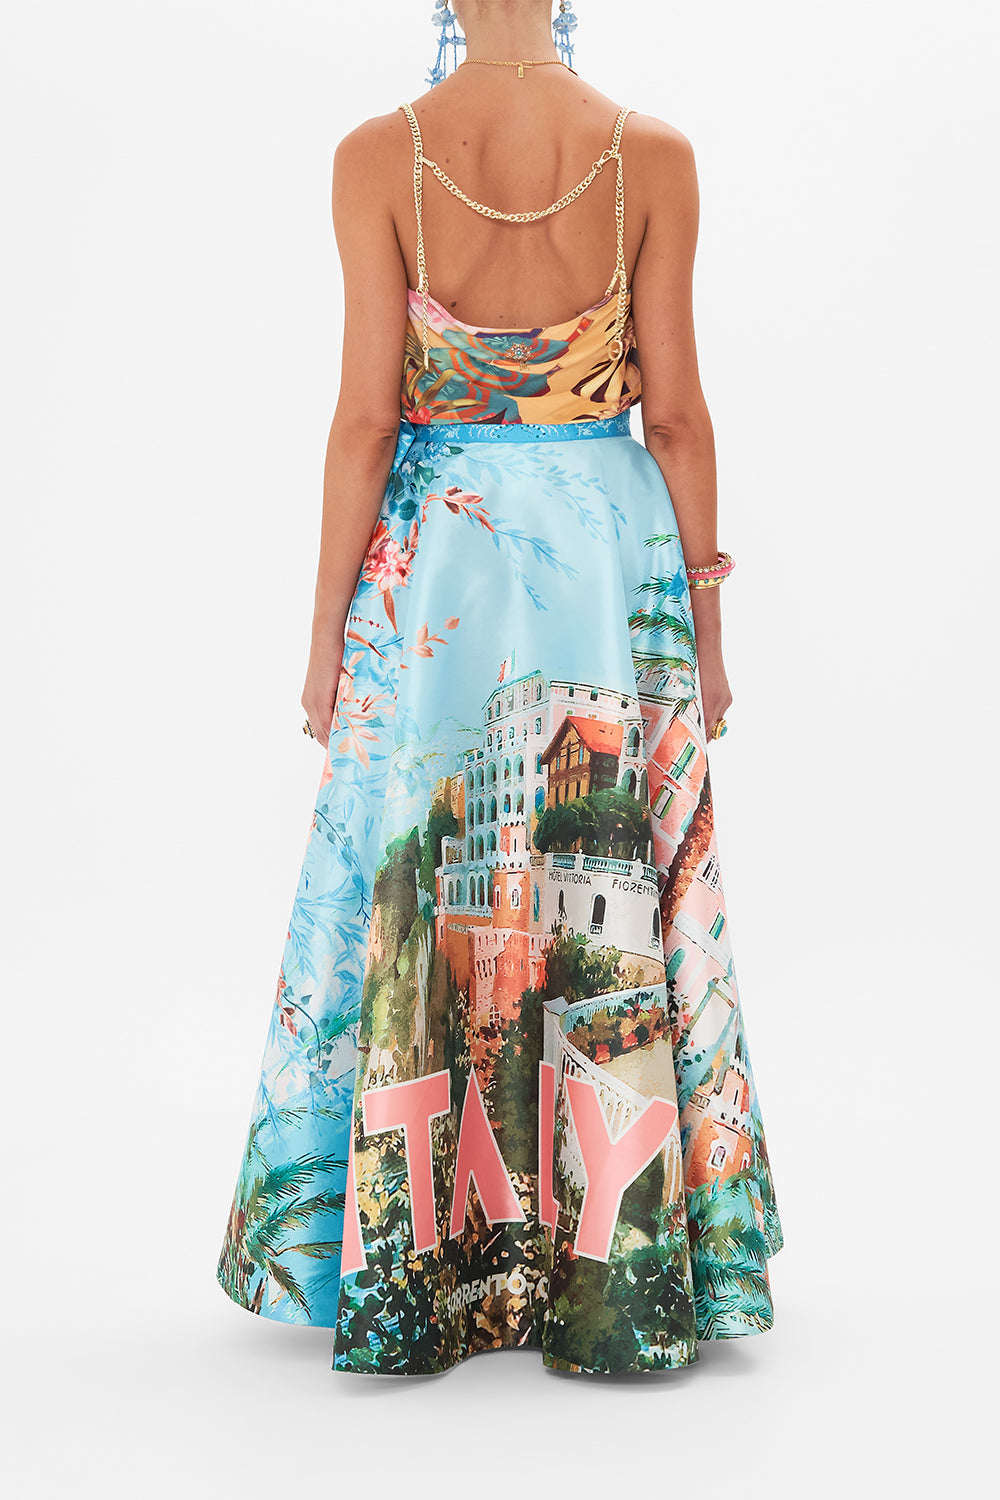 Back view of model wearing CAMILLA maxi wrap skirt in From Sorrento With Love print